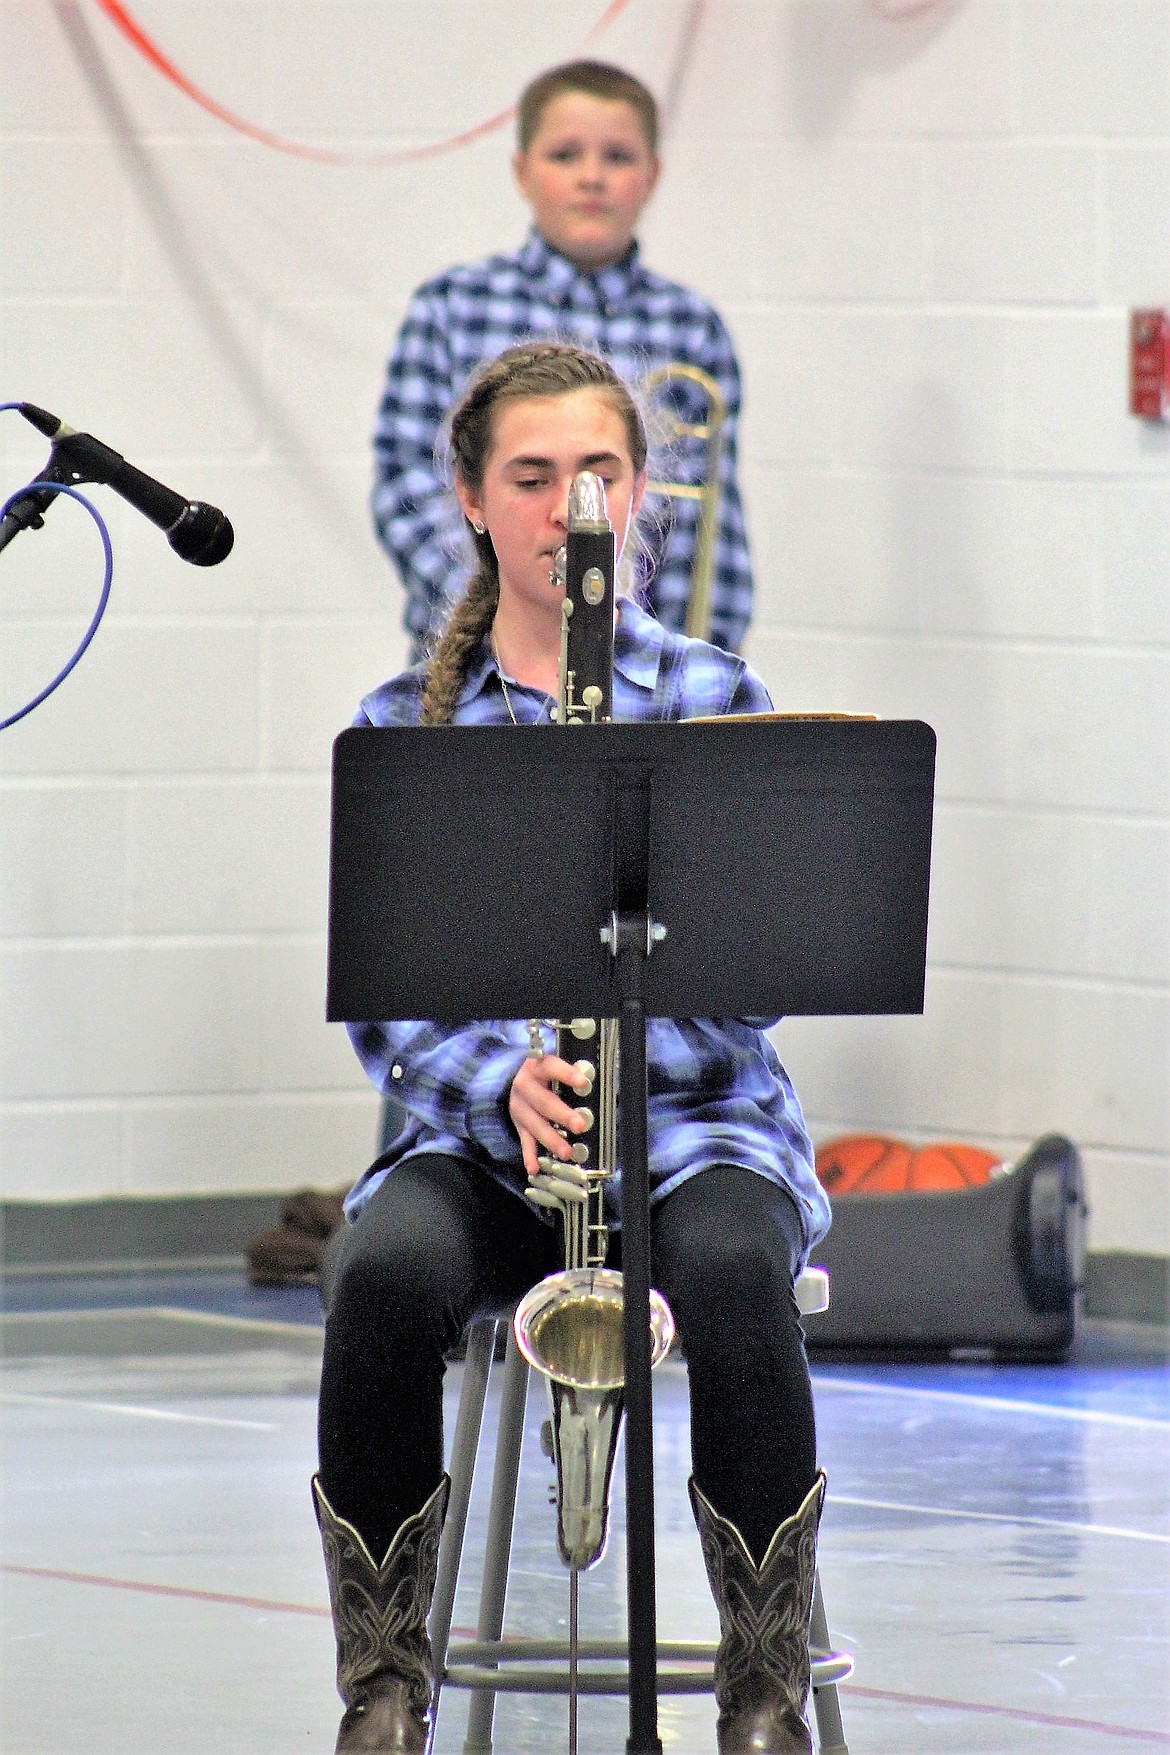 Lanie Crabb, fifth grade, plays the bass clarinet during the Friday talent show, just after Jaxson Green played the trombone.